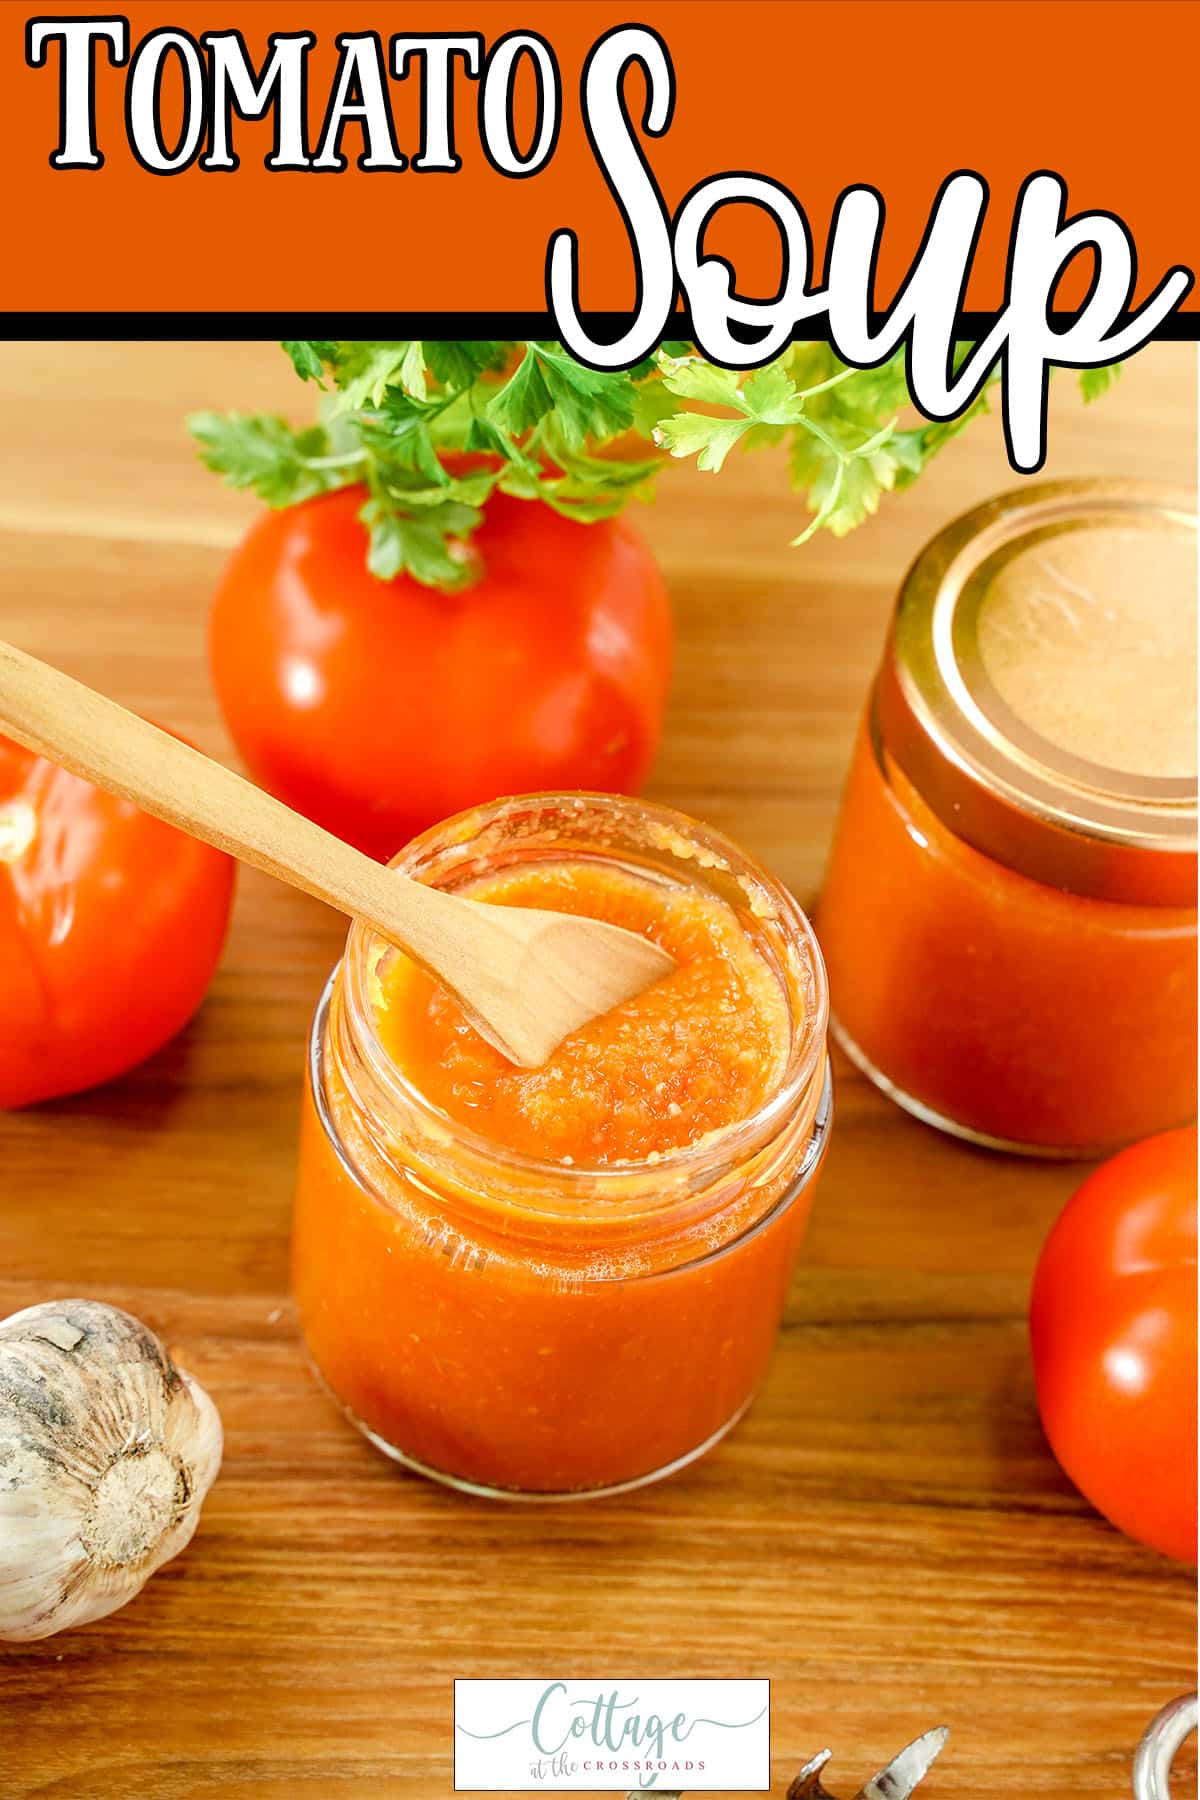 How to make tomato soup from scratch with text which reads tomato soup